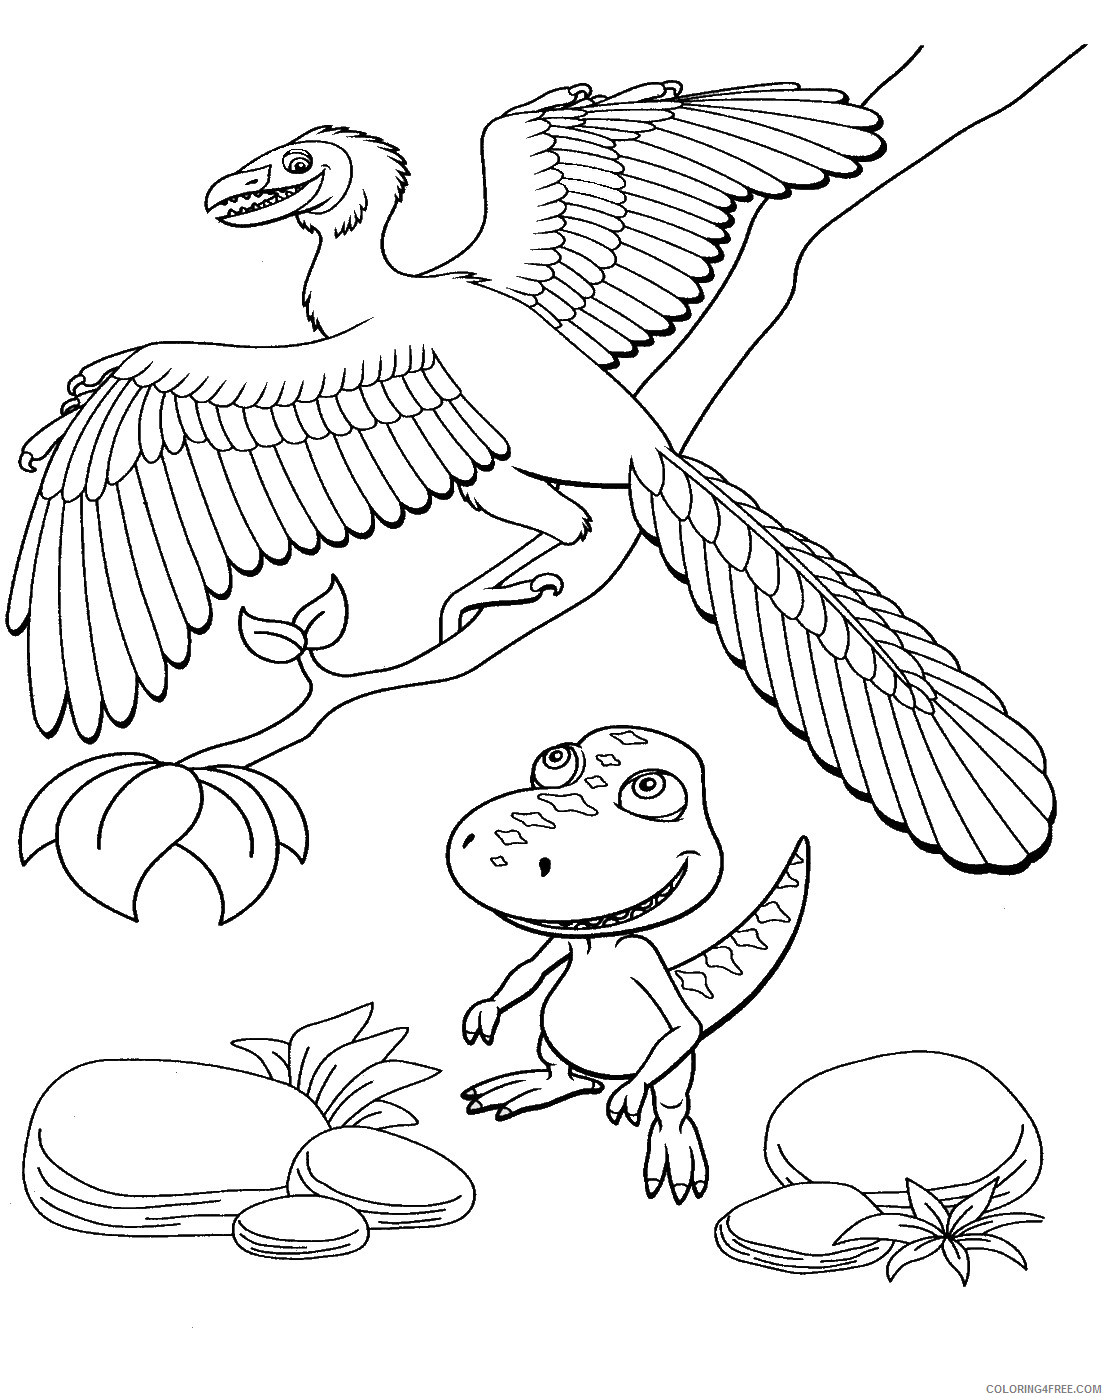 Dinosaur Train Coloring Pages Cartoons dino_train_cl_21 Printable 2020 2242 Coloring4free